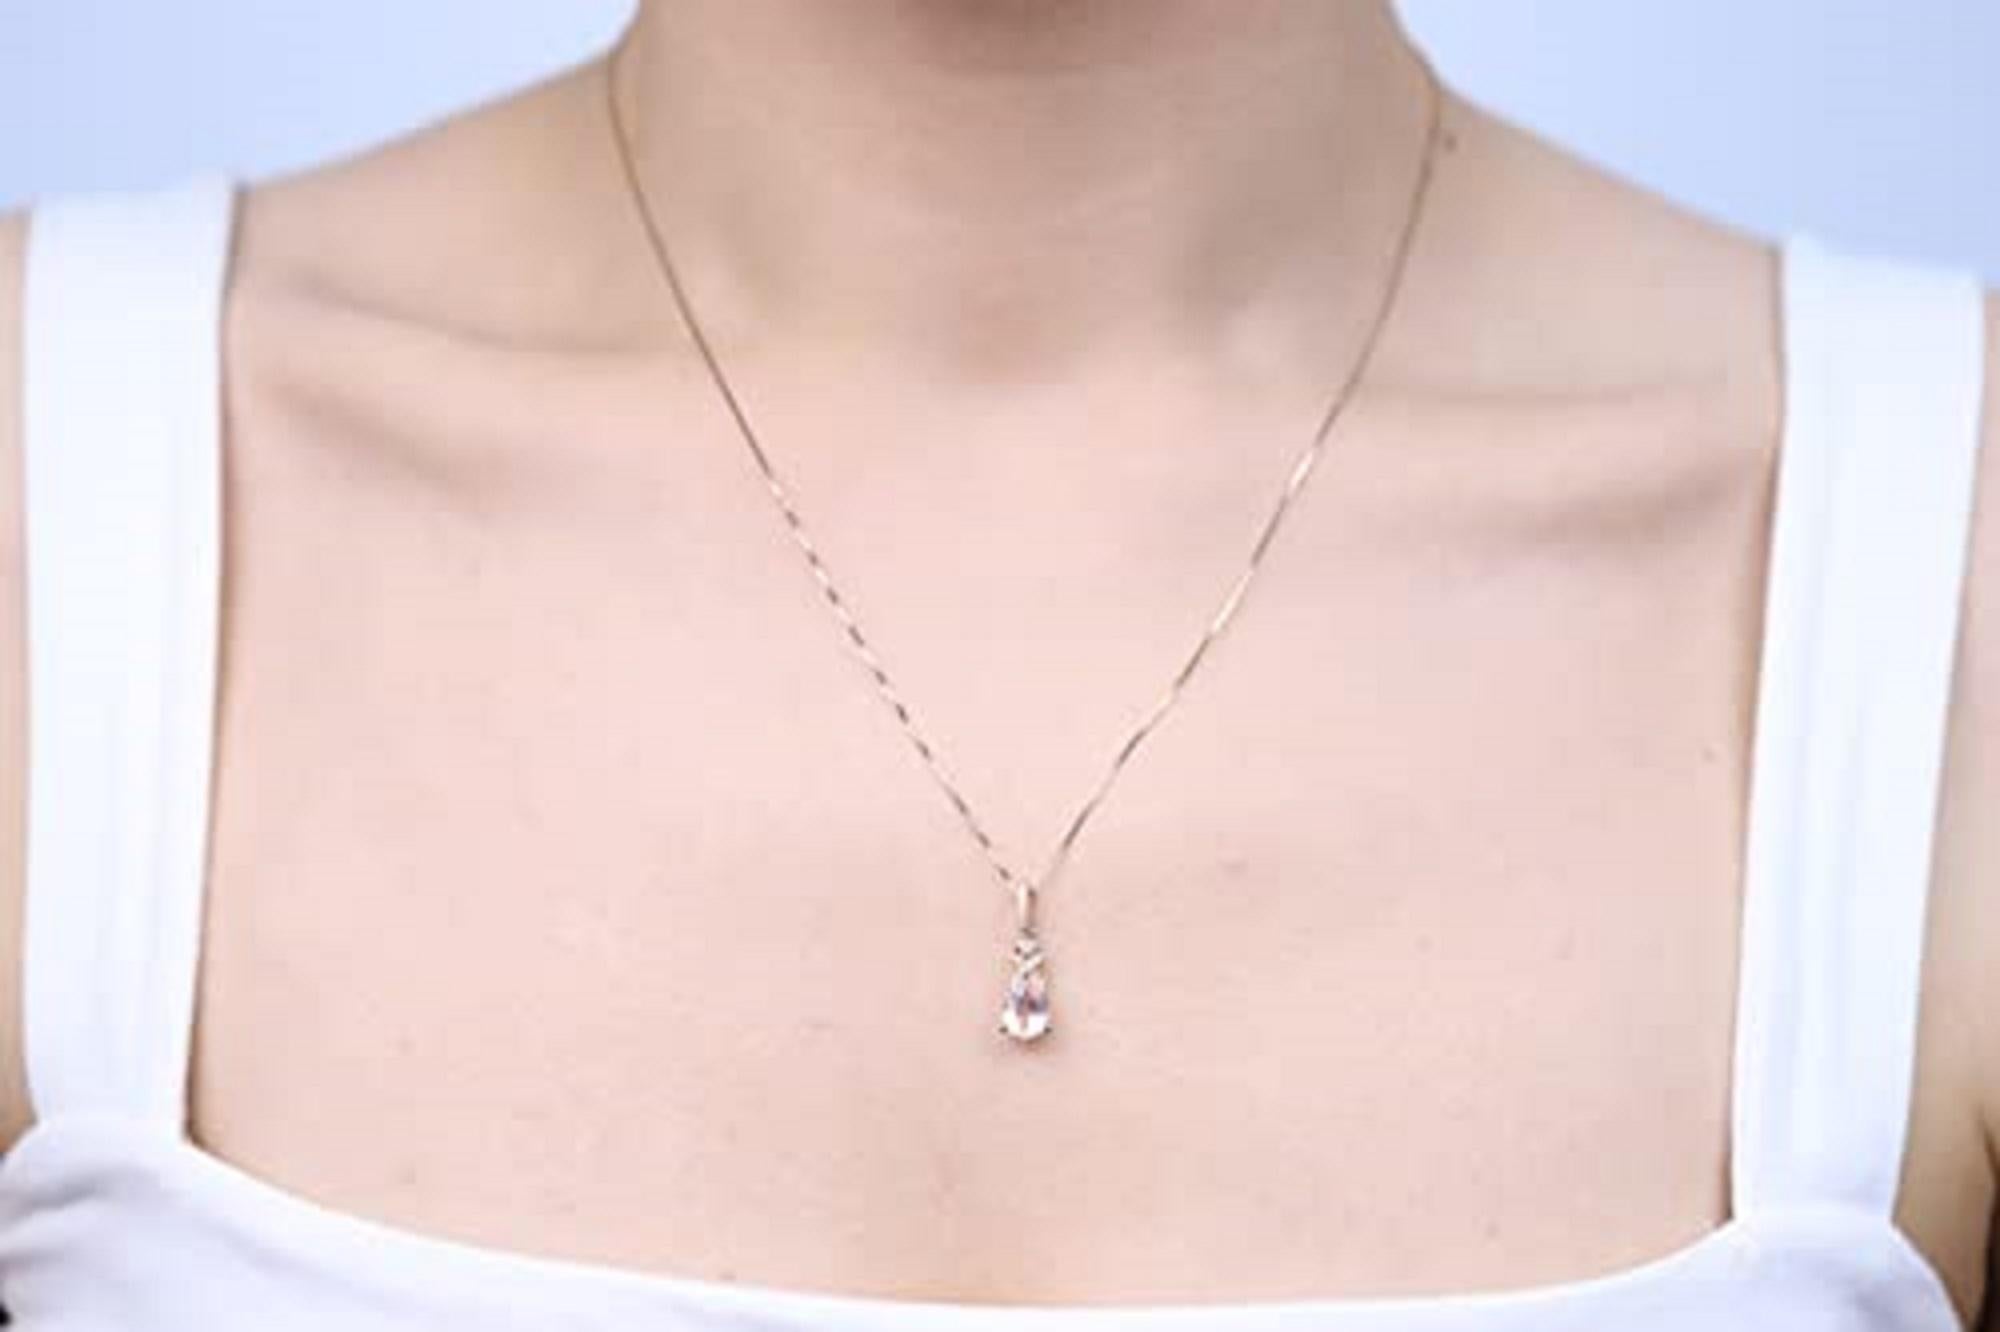 Decorate yourself in luxury with this Gin & Grace Pendant. The 10k Rose Gold jewelry boasts 6X8 Pear-Cut Prong Setting Genuine Morganite (1pcs) 0.87 Carat and Round-Cut Prong Setting Natural Diamond (15pcs) 0.11 Carat accent stones for a lovely